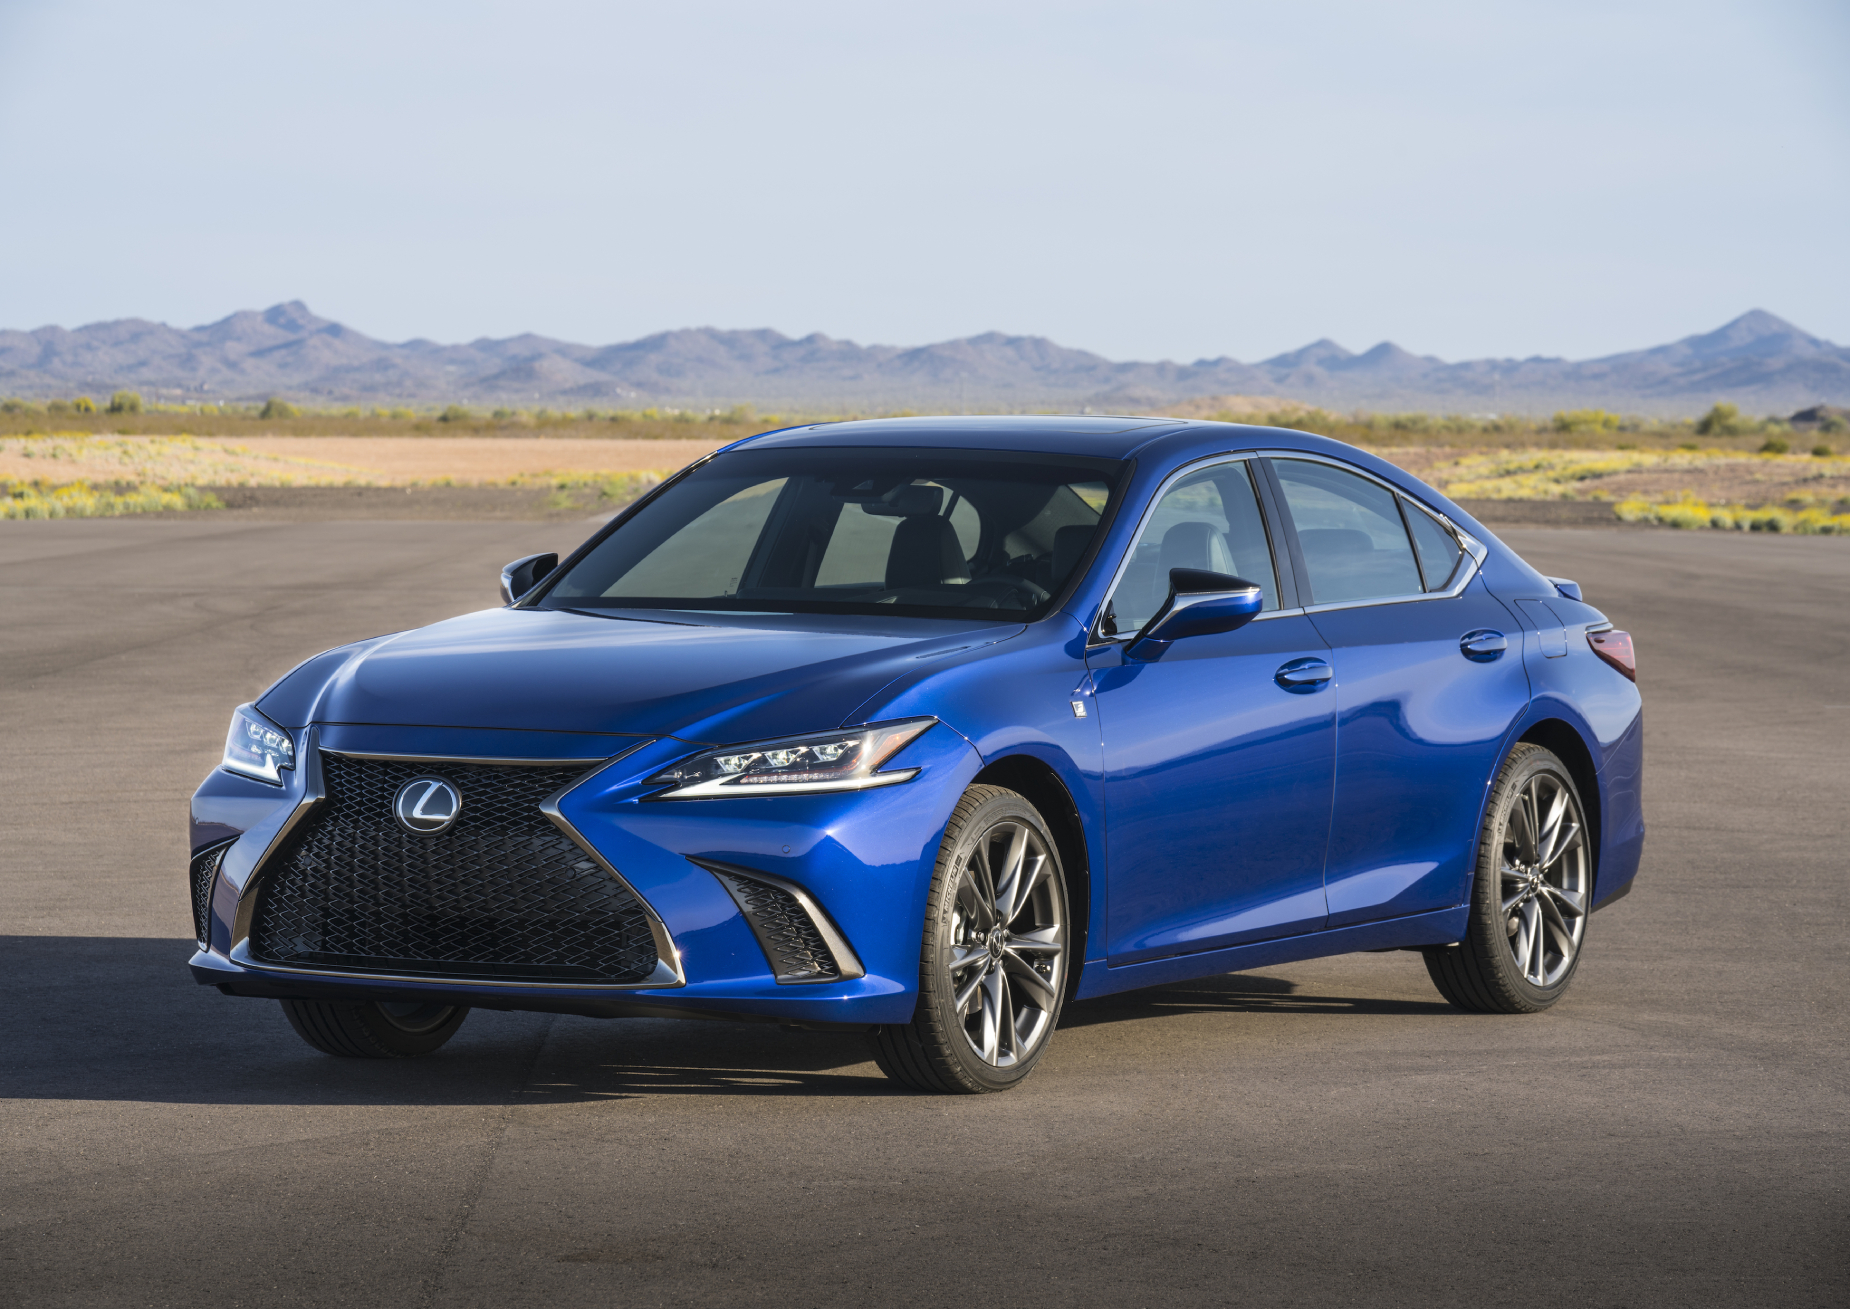 A blue 2021 Lexus ES on display with a mountain range in the background